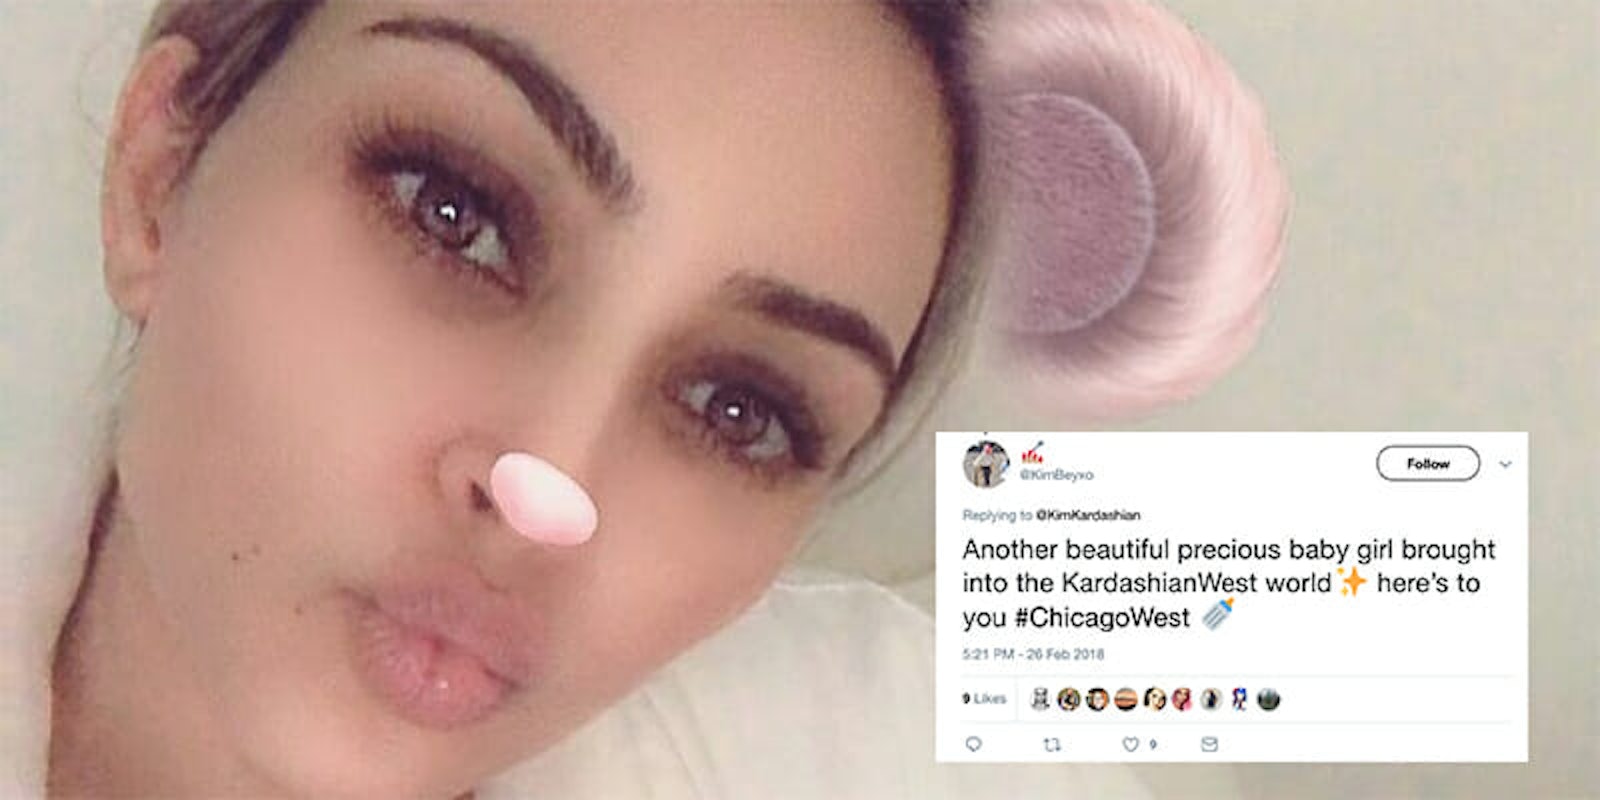 Kim Kardashian West posted the first photo of baby Chicago to Instagram.